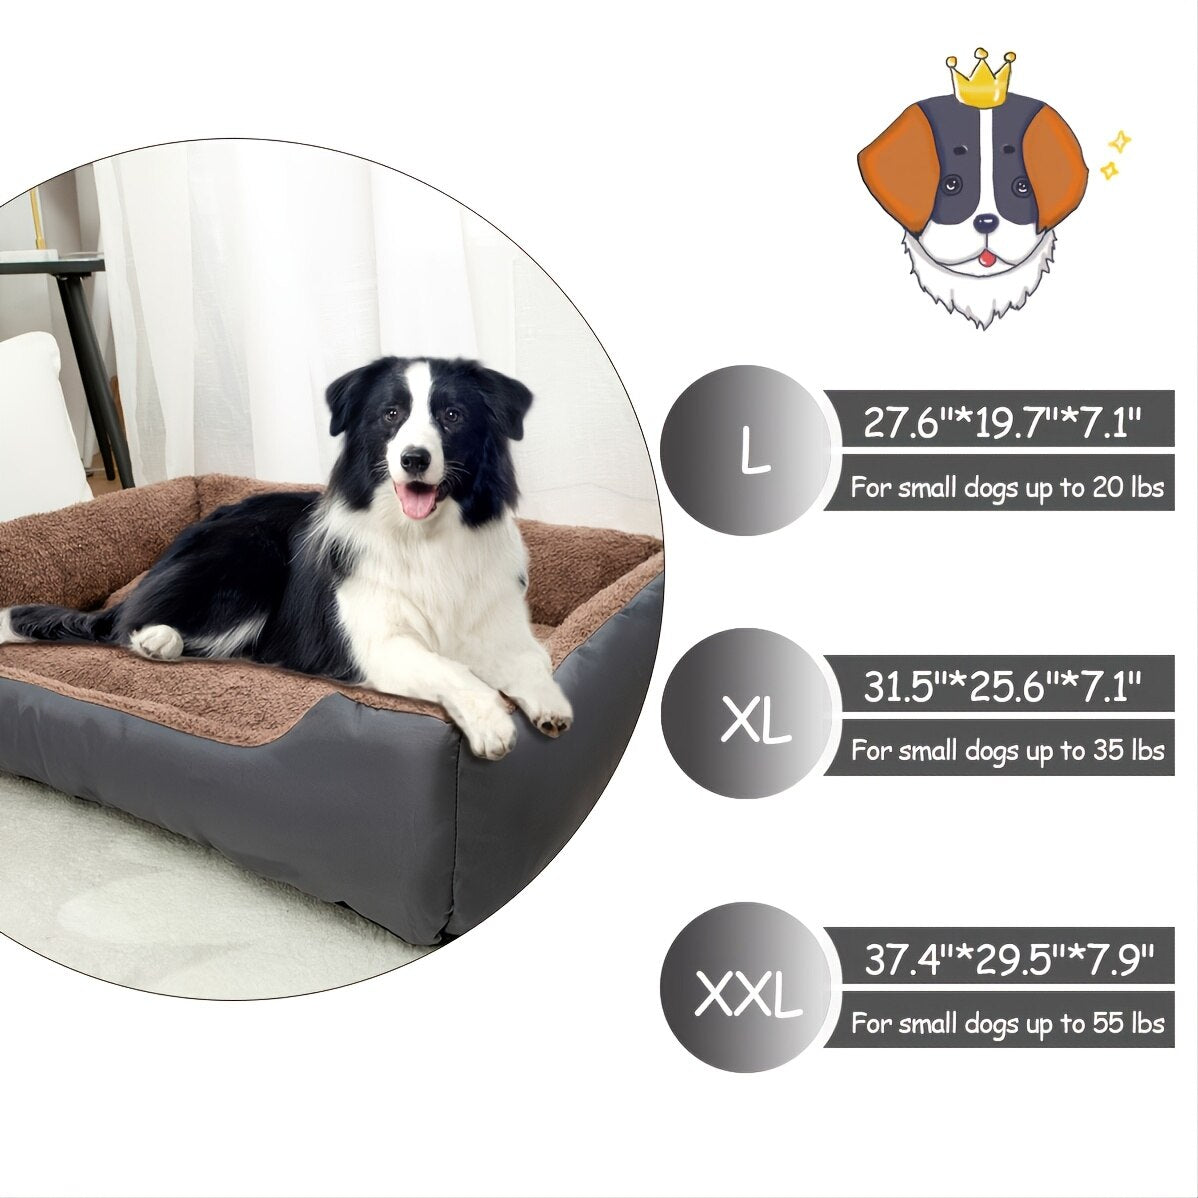 Dog Sofa Pet Beds Supplies Puppy Accessories Blanket Bed Bad Large Small Mat Accessory Dogs Basket Pets Baskets Bedding Cushions